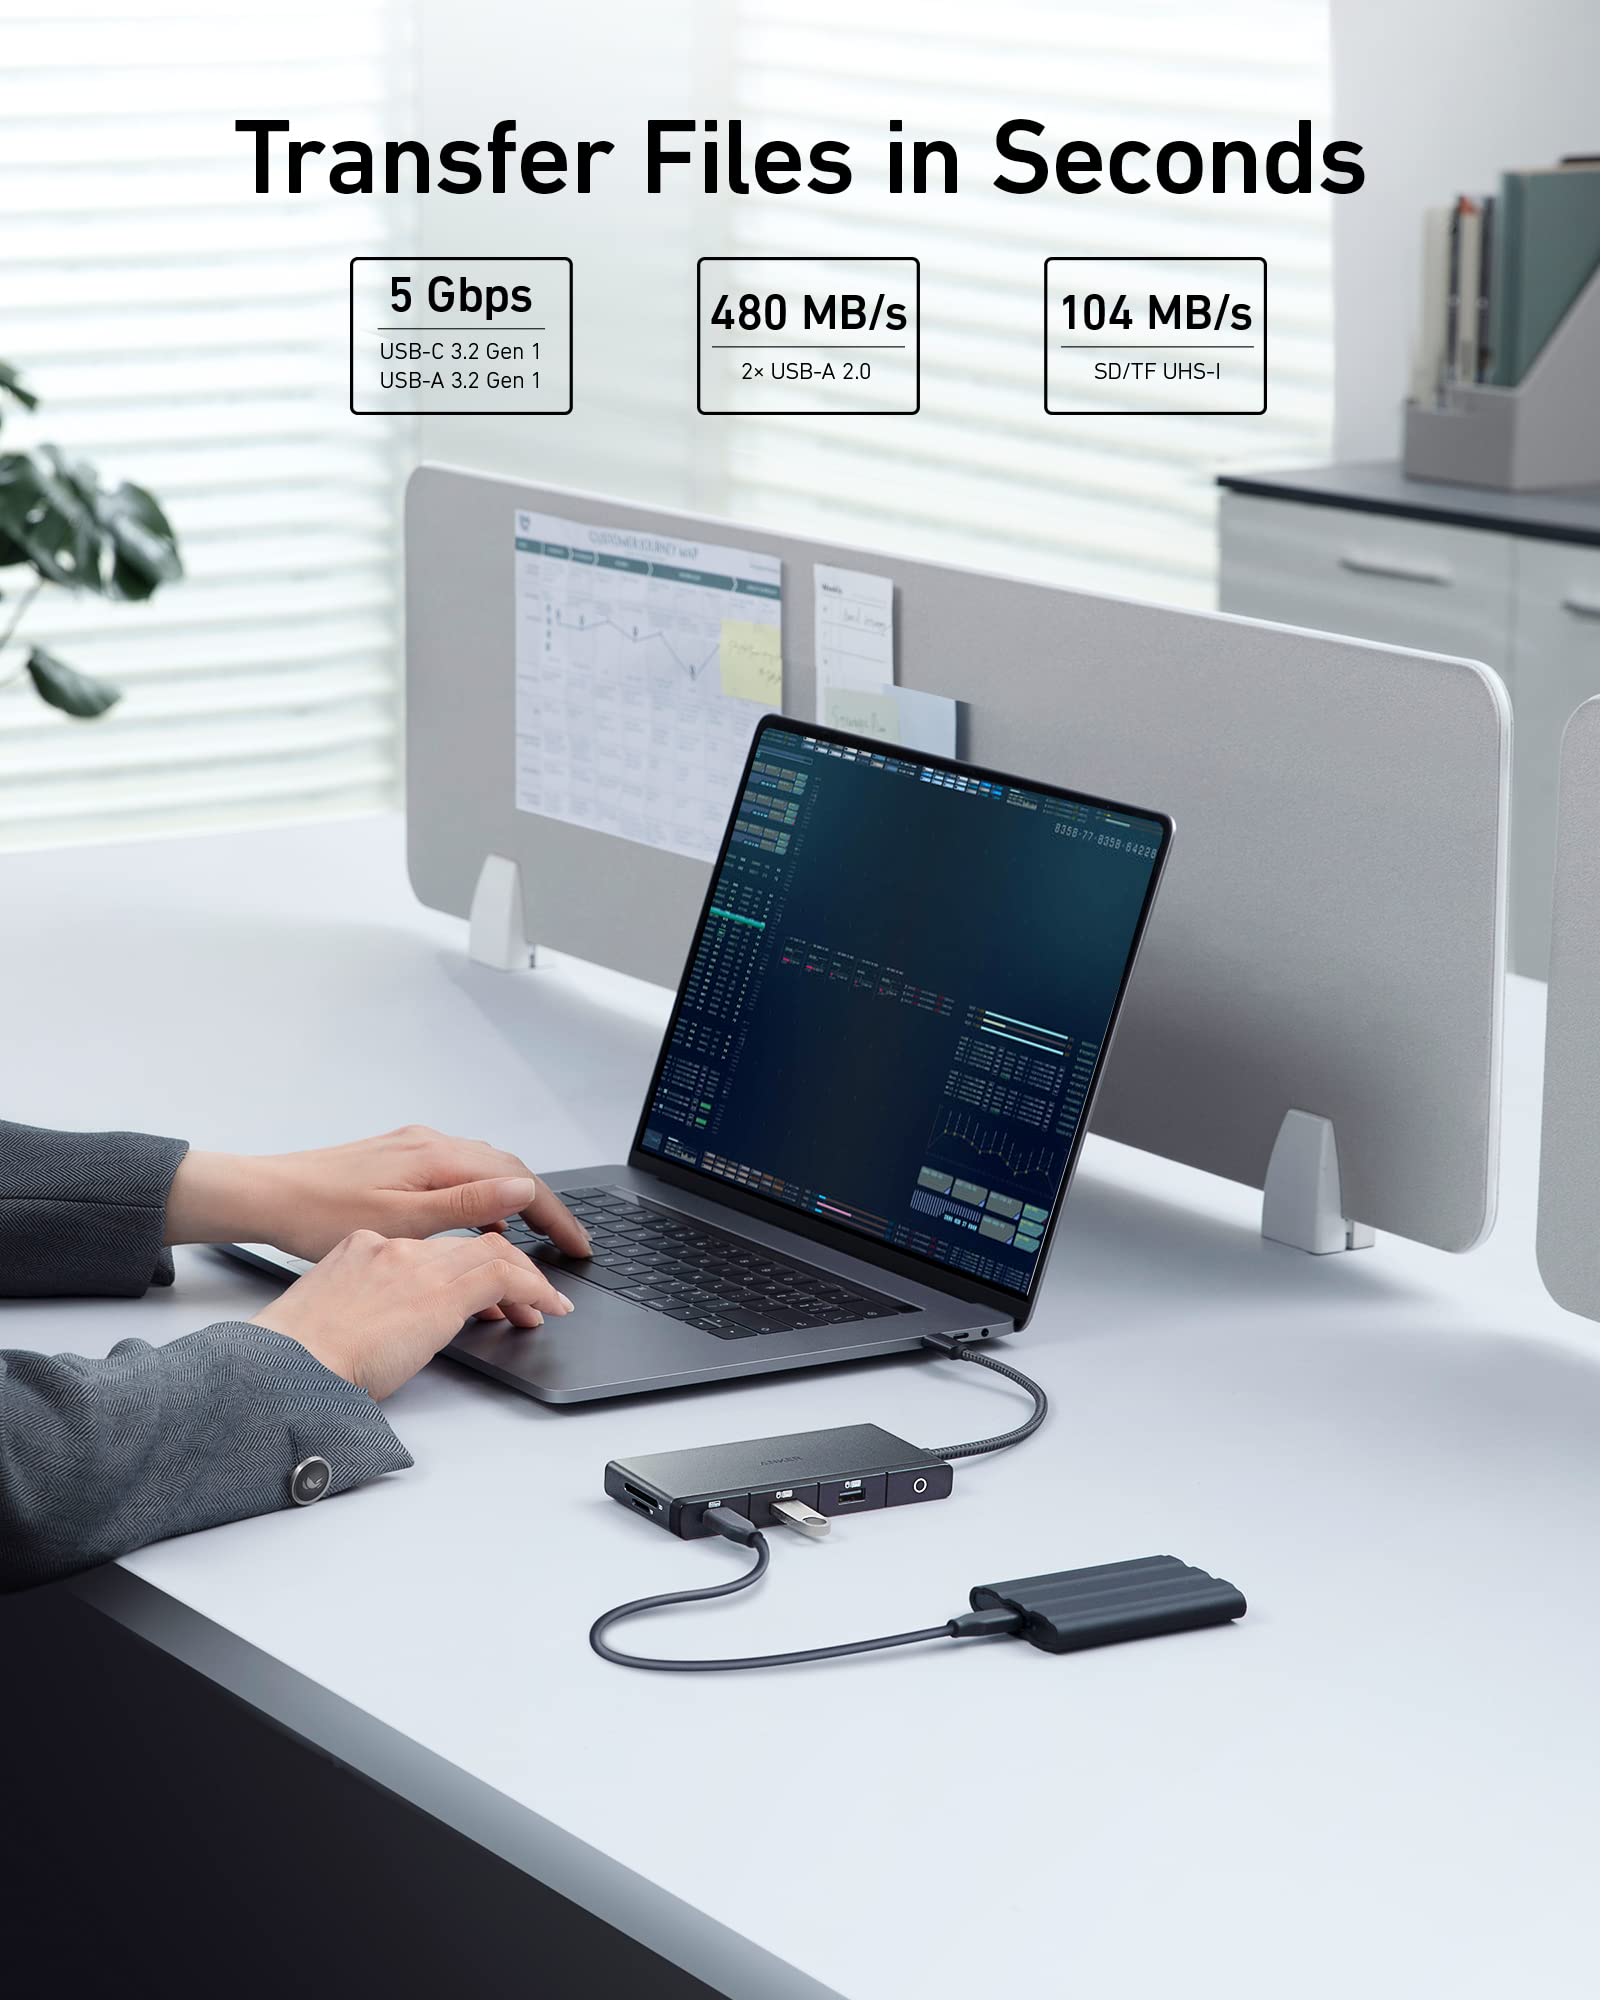 Anker USB C Hub, 552 USB-C Hub (9-in-1, 4K HDMI) with 100W Power Delivery, 4K@30Hz HDMI, 4 USB-C and USB-A Data Ports, Ethernet and SD/microSD Card Slot for MacBook, HP, Dell Laptops, and More